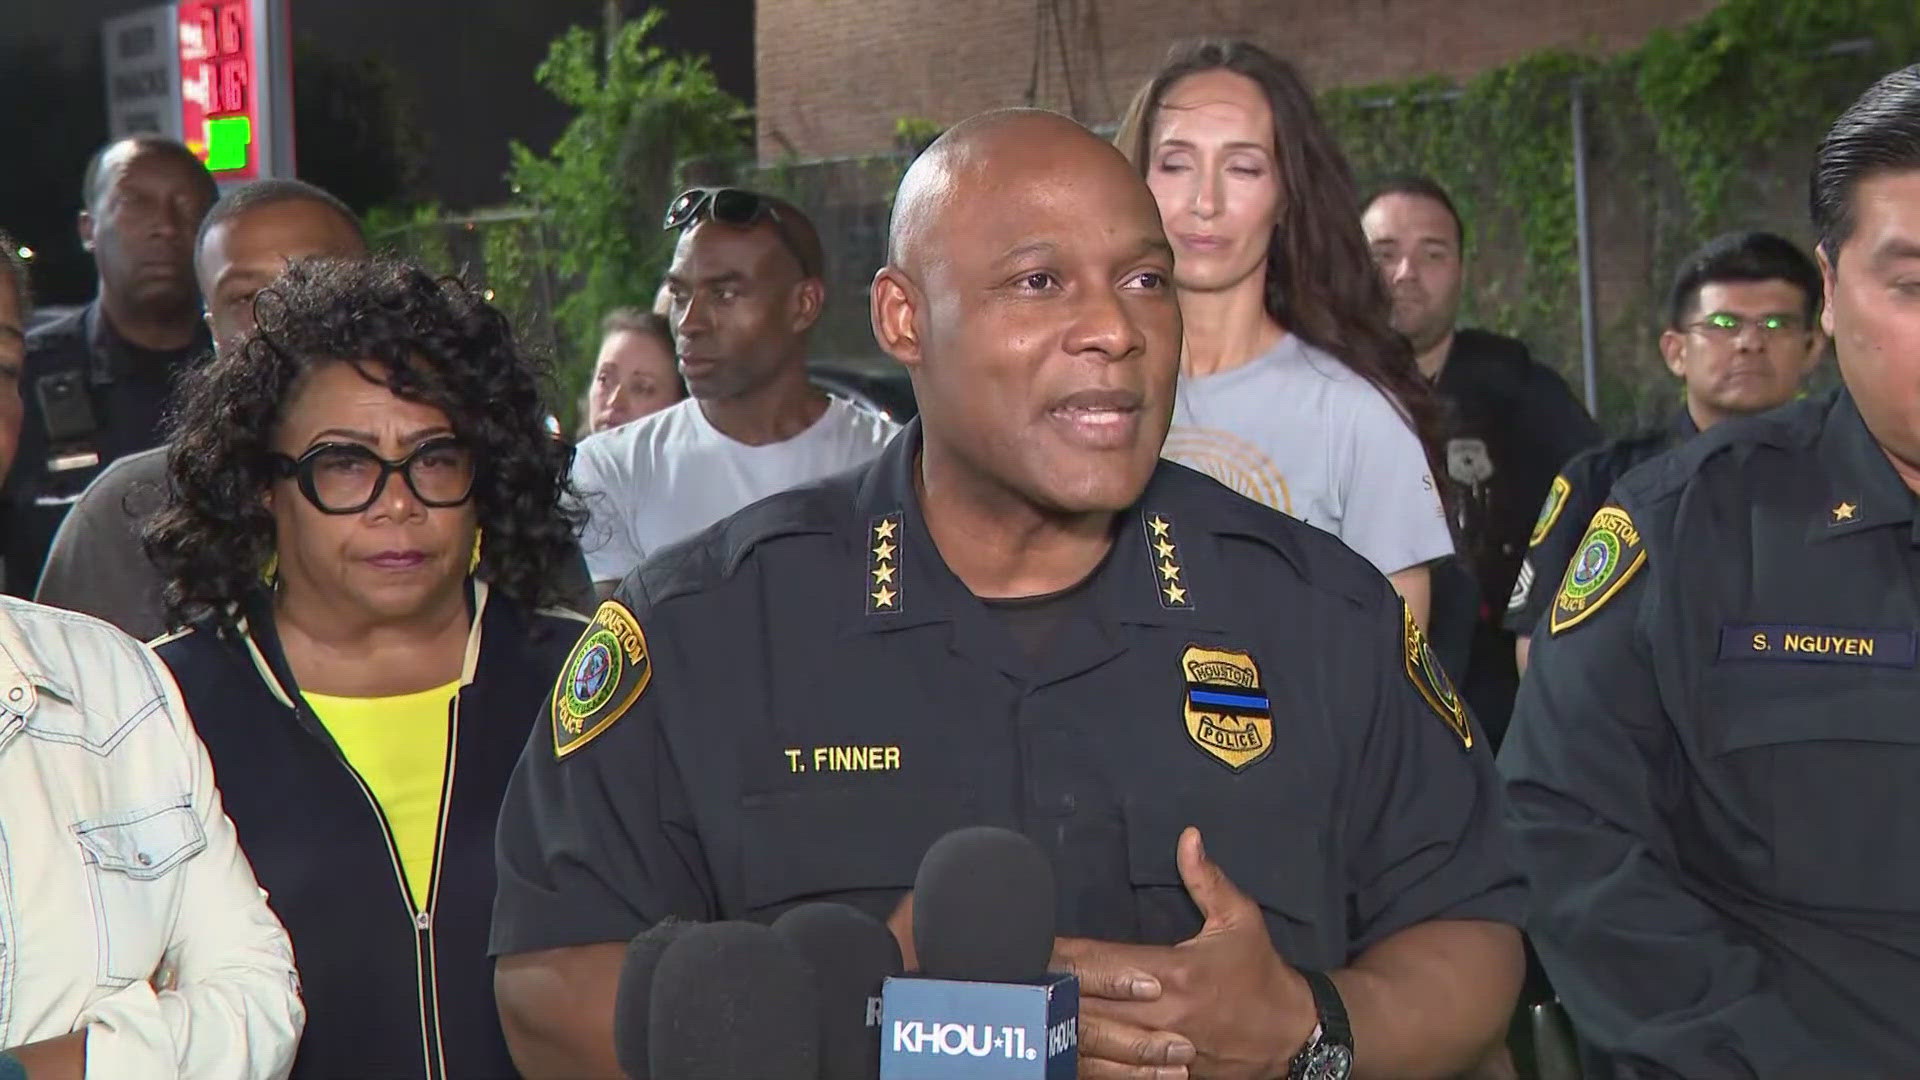 HPD Chief Troy Finner spoke about reducing crime in Houston's Third Ward and how police plan to do it.